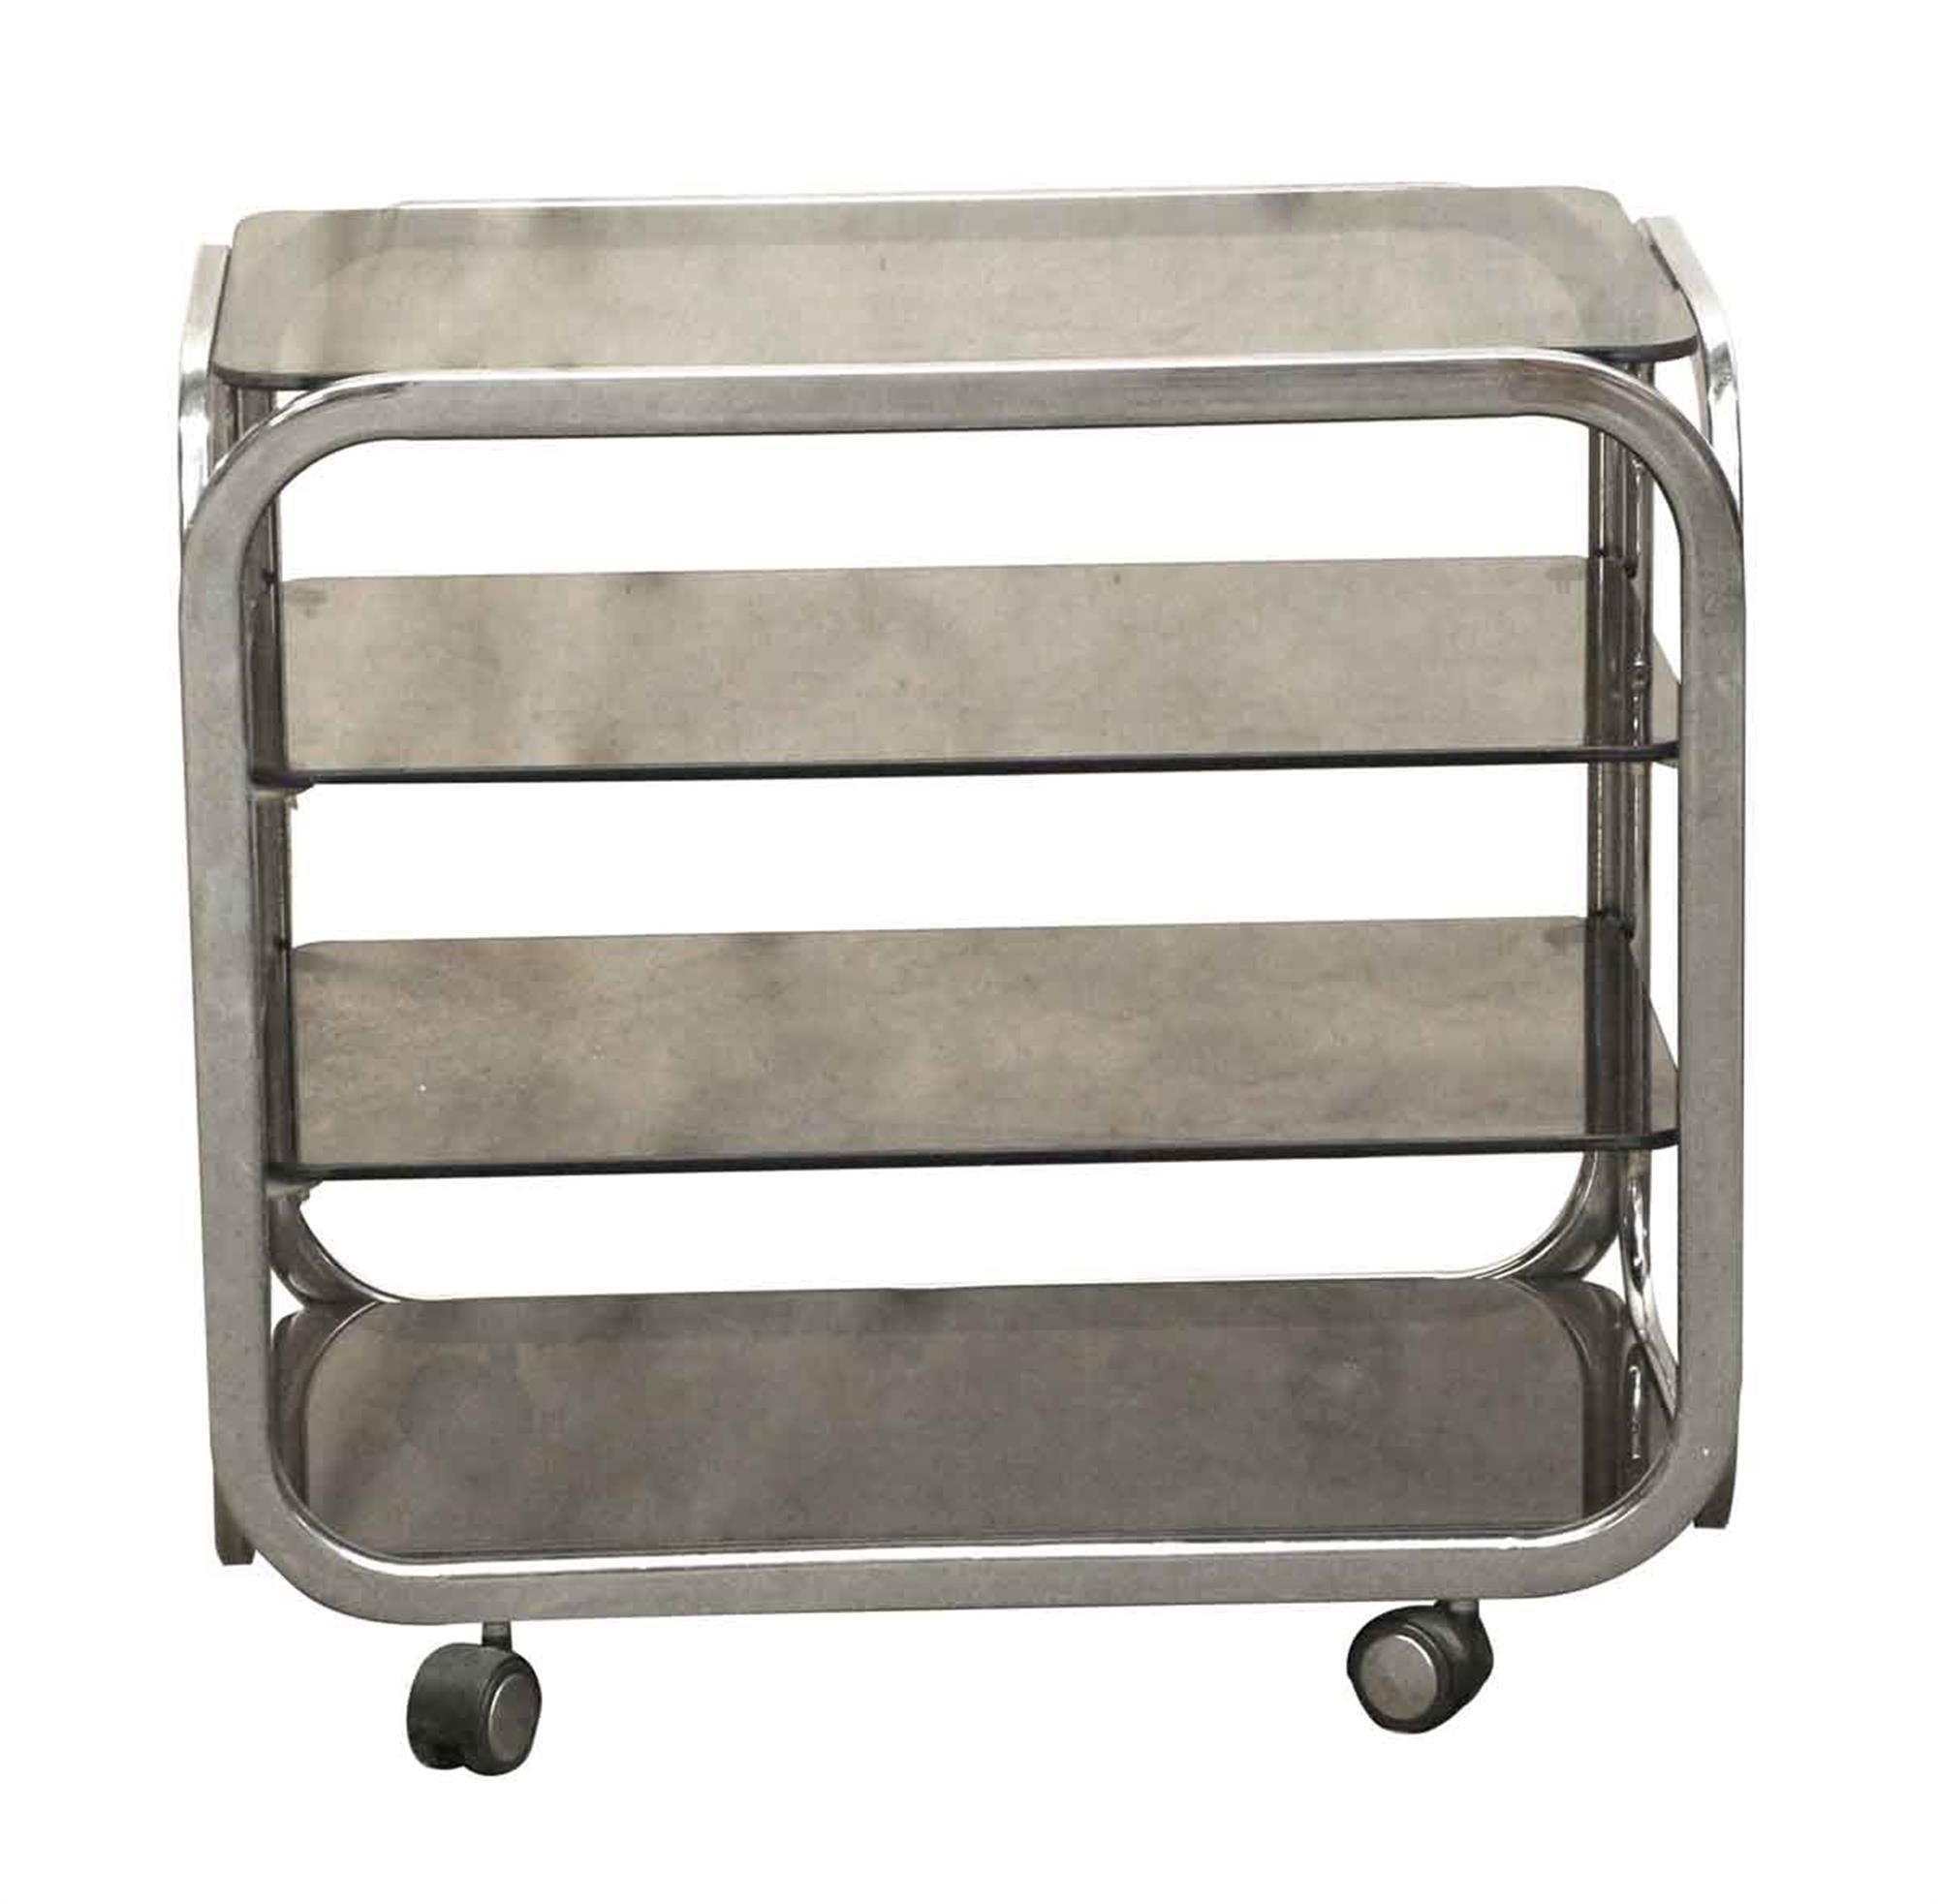 French 1970s chrome-plated wheeled bar cart with four smoked glass tiered shelves done in a Mid-Century Modern styling. This can be seen at our 400 Gilligan St location in Scranton, PA.